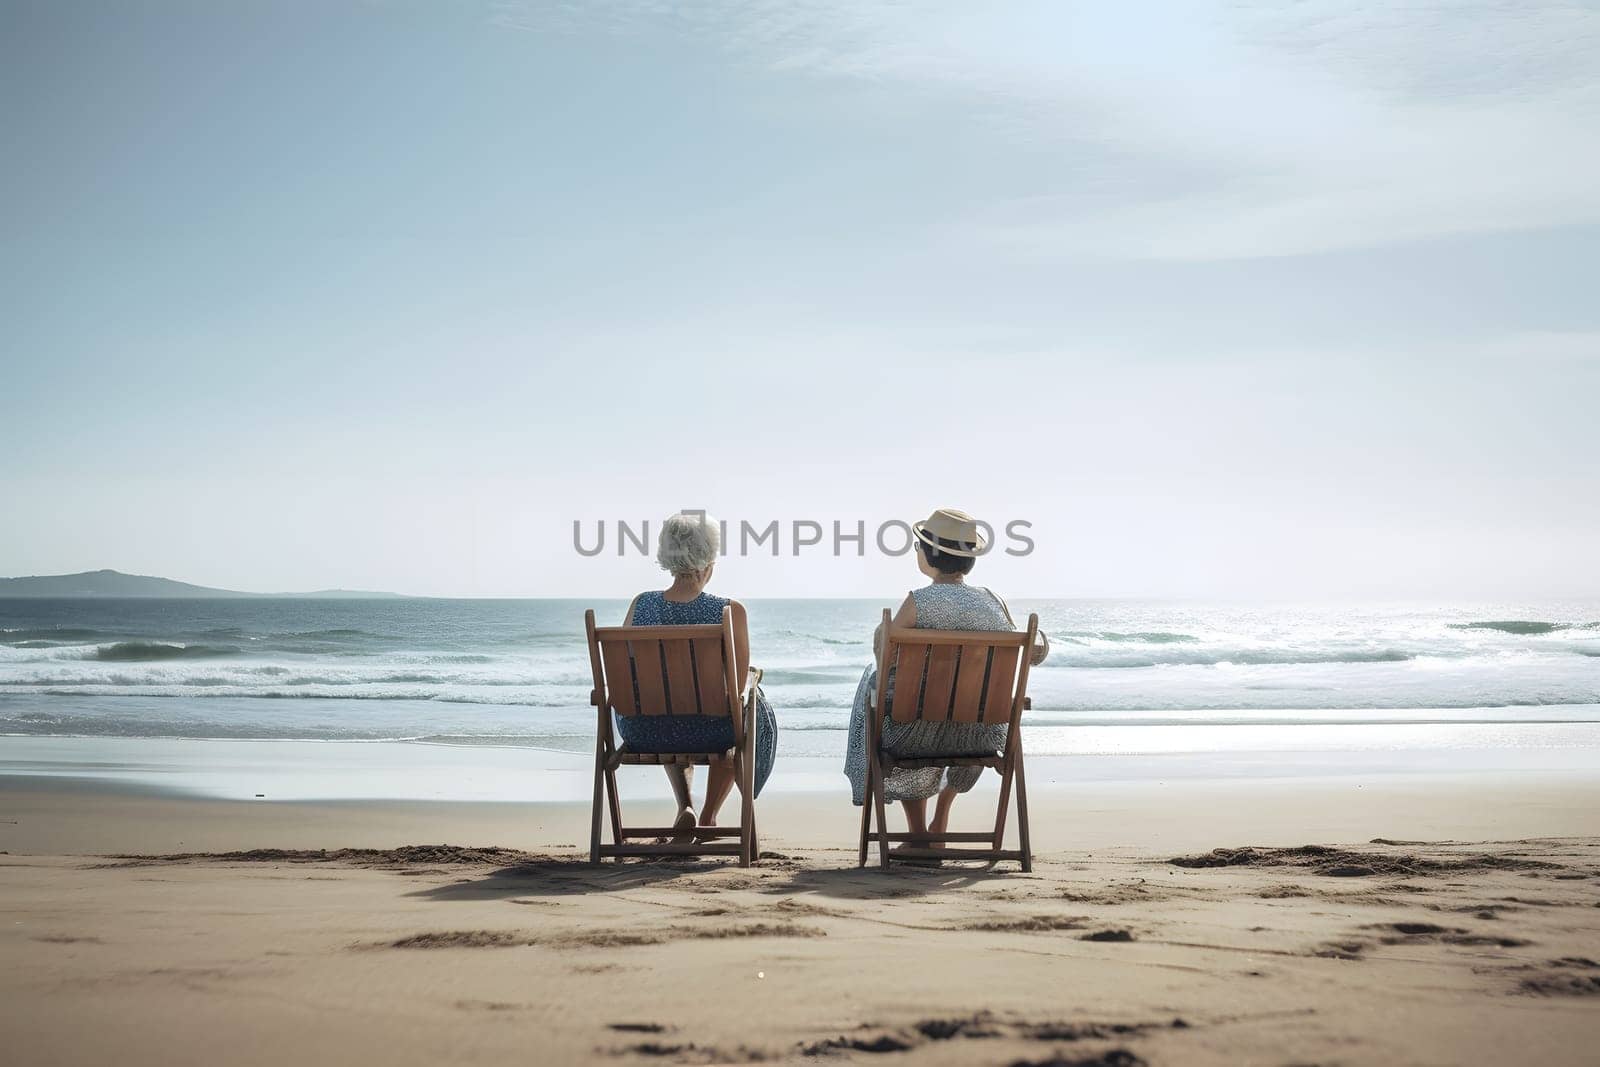 two women sitting on chairs at beach looking at sea horizon. Neural network generated in May 2023. Not based on any actual person, scene or pattern.